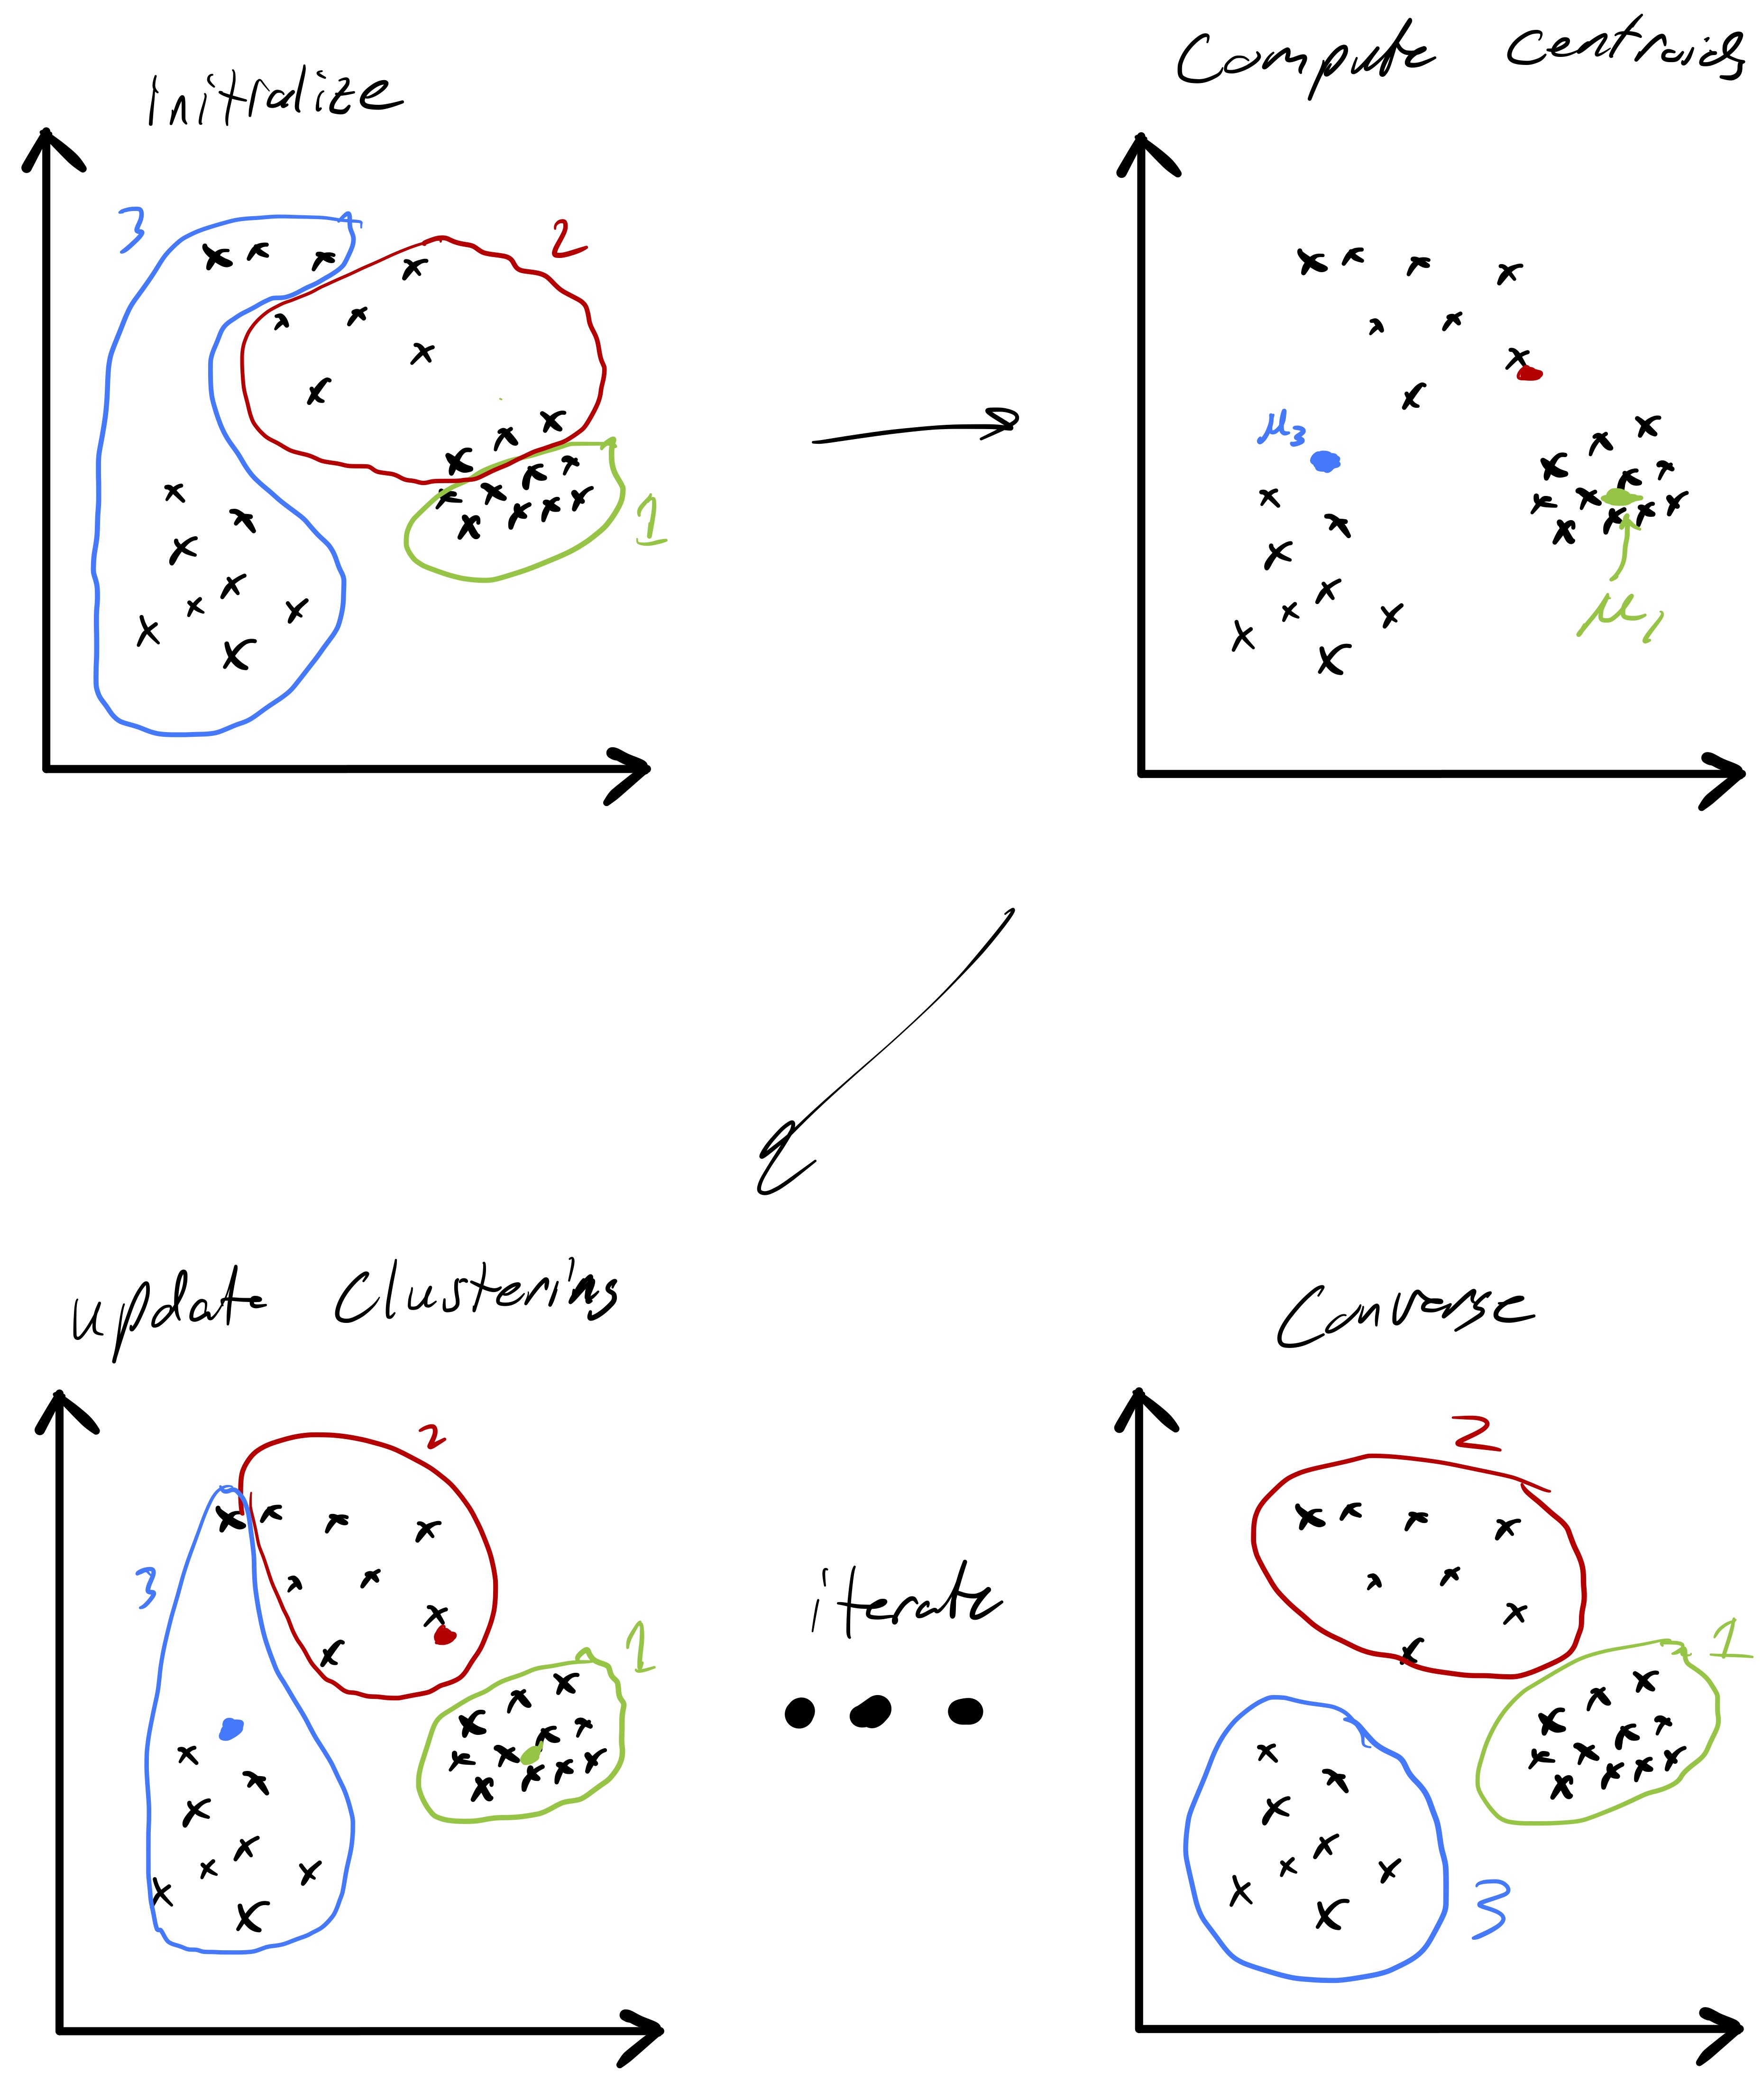 Figure 3: Lloyd’s algorithm performing k-means clustering of data into three clusters.